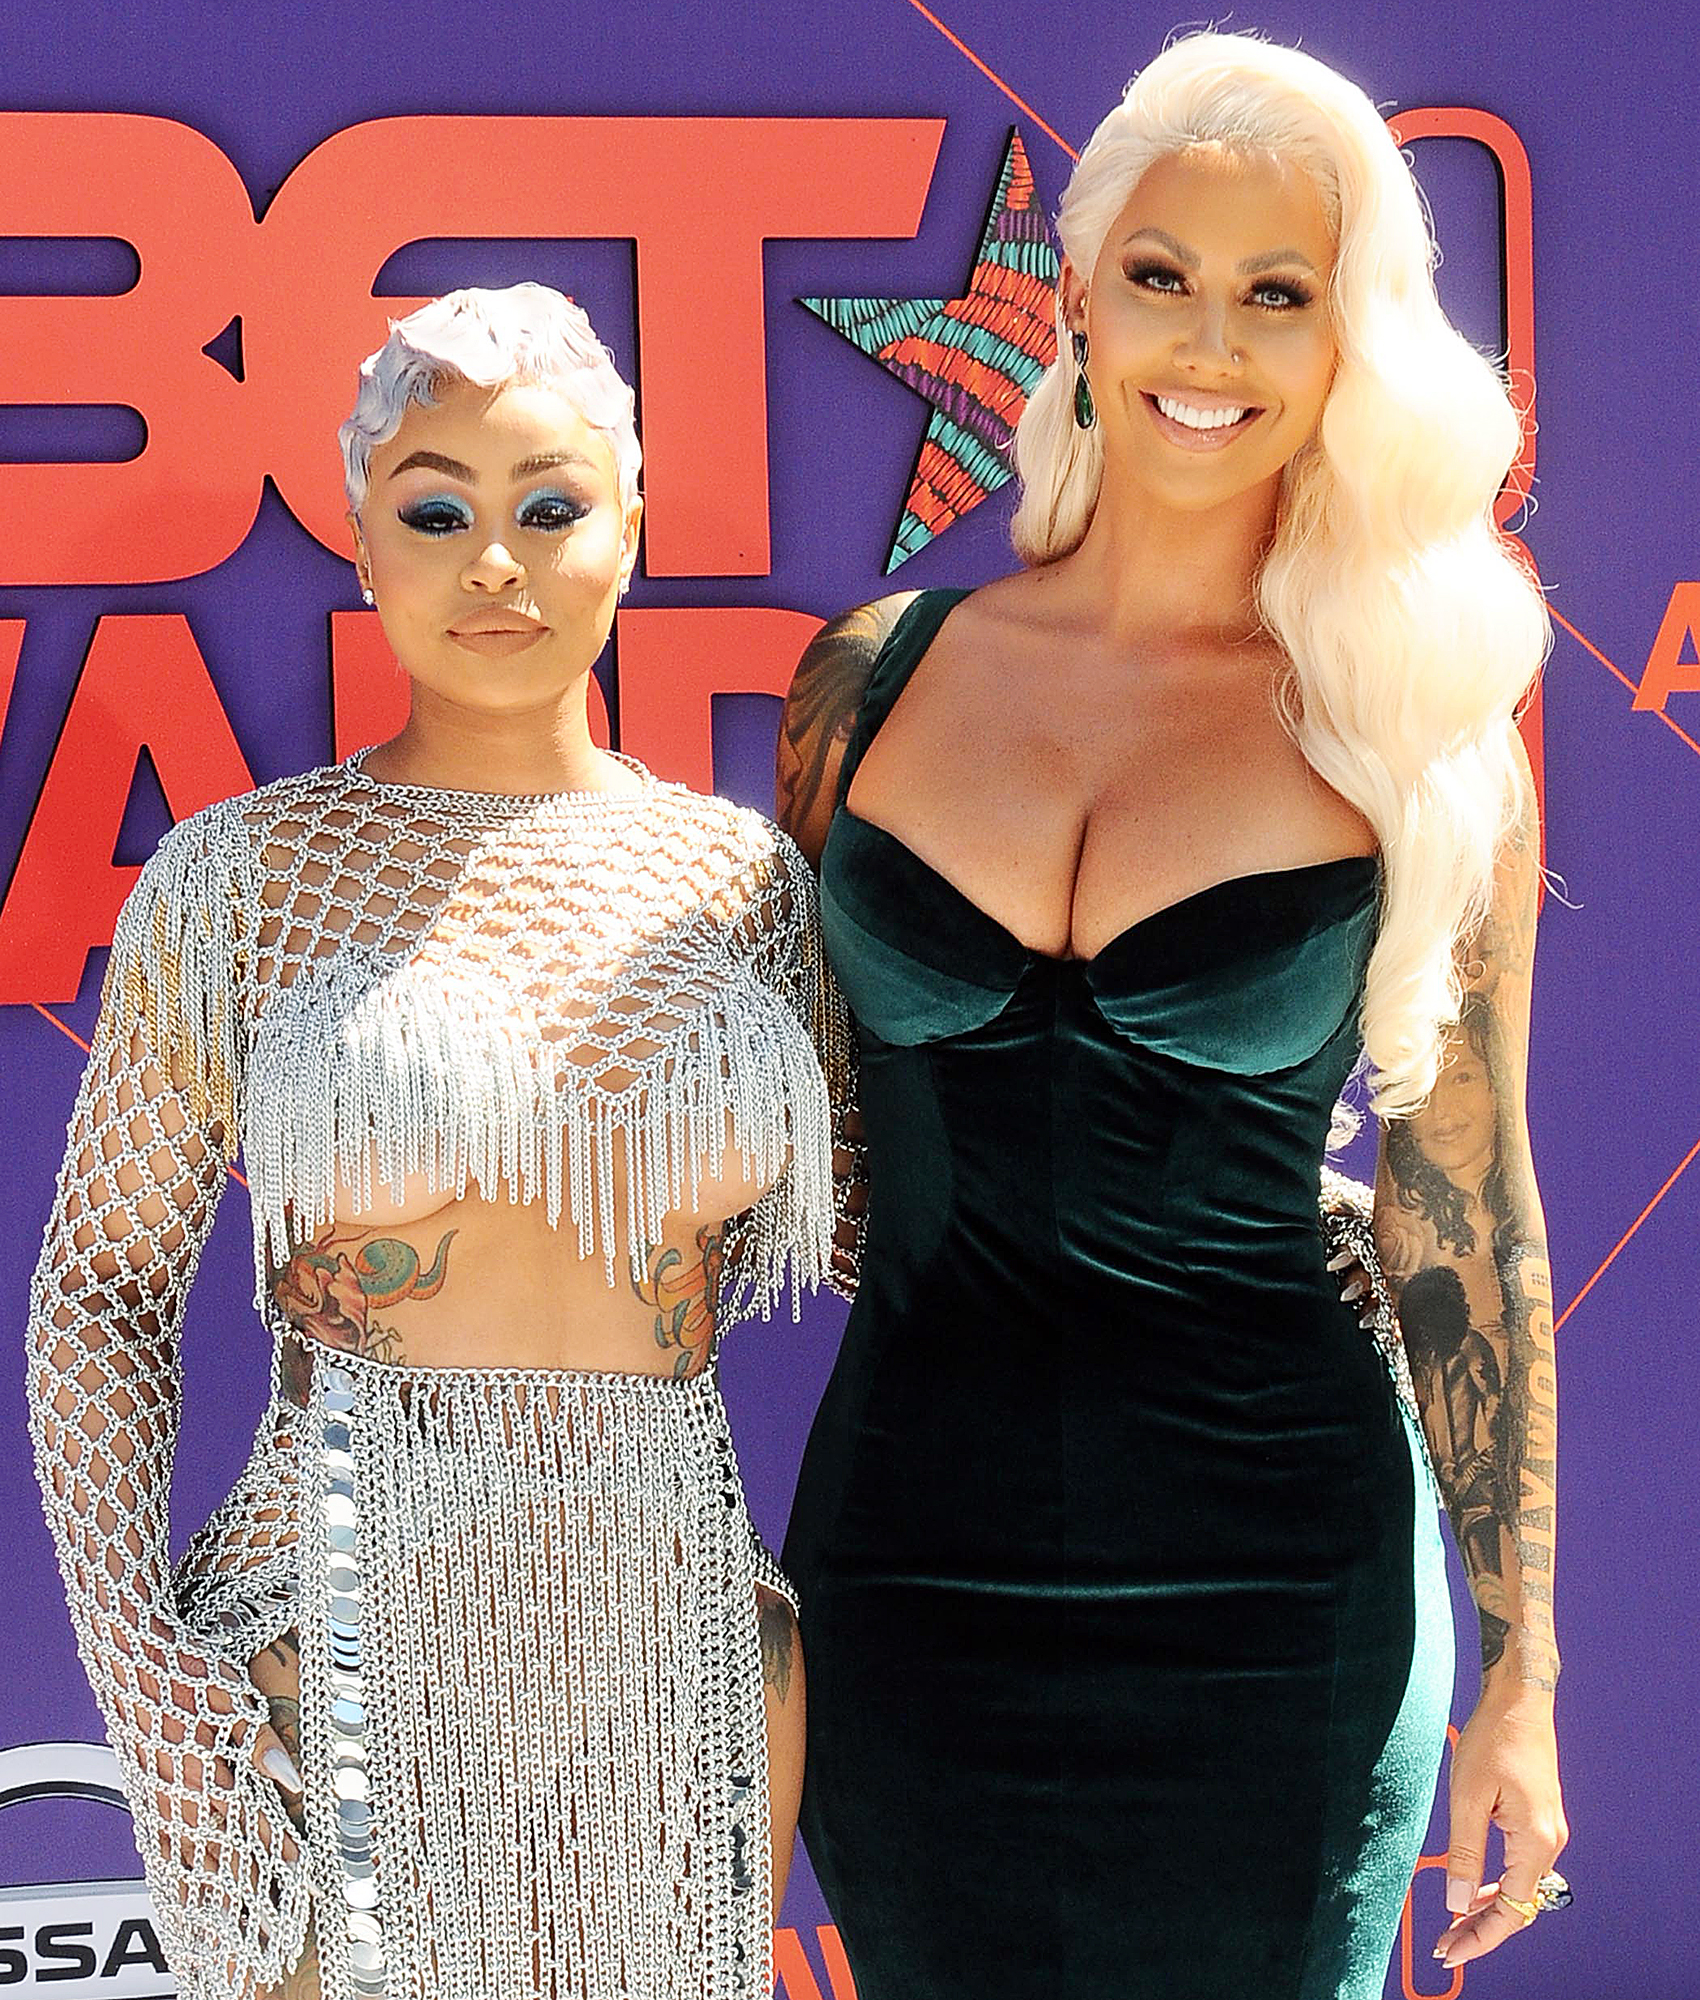 Blac Chyna’s Mother Tokyo Toni Makes Emotional Plea to Amber Rose1700 x 2000